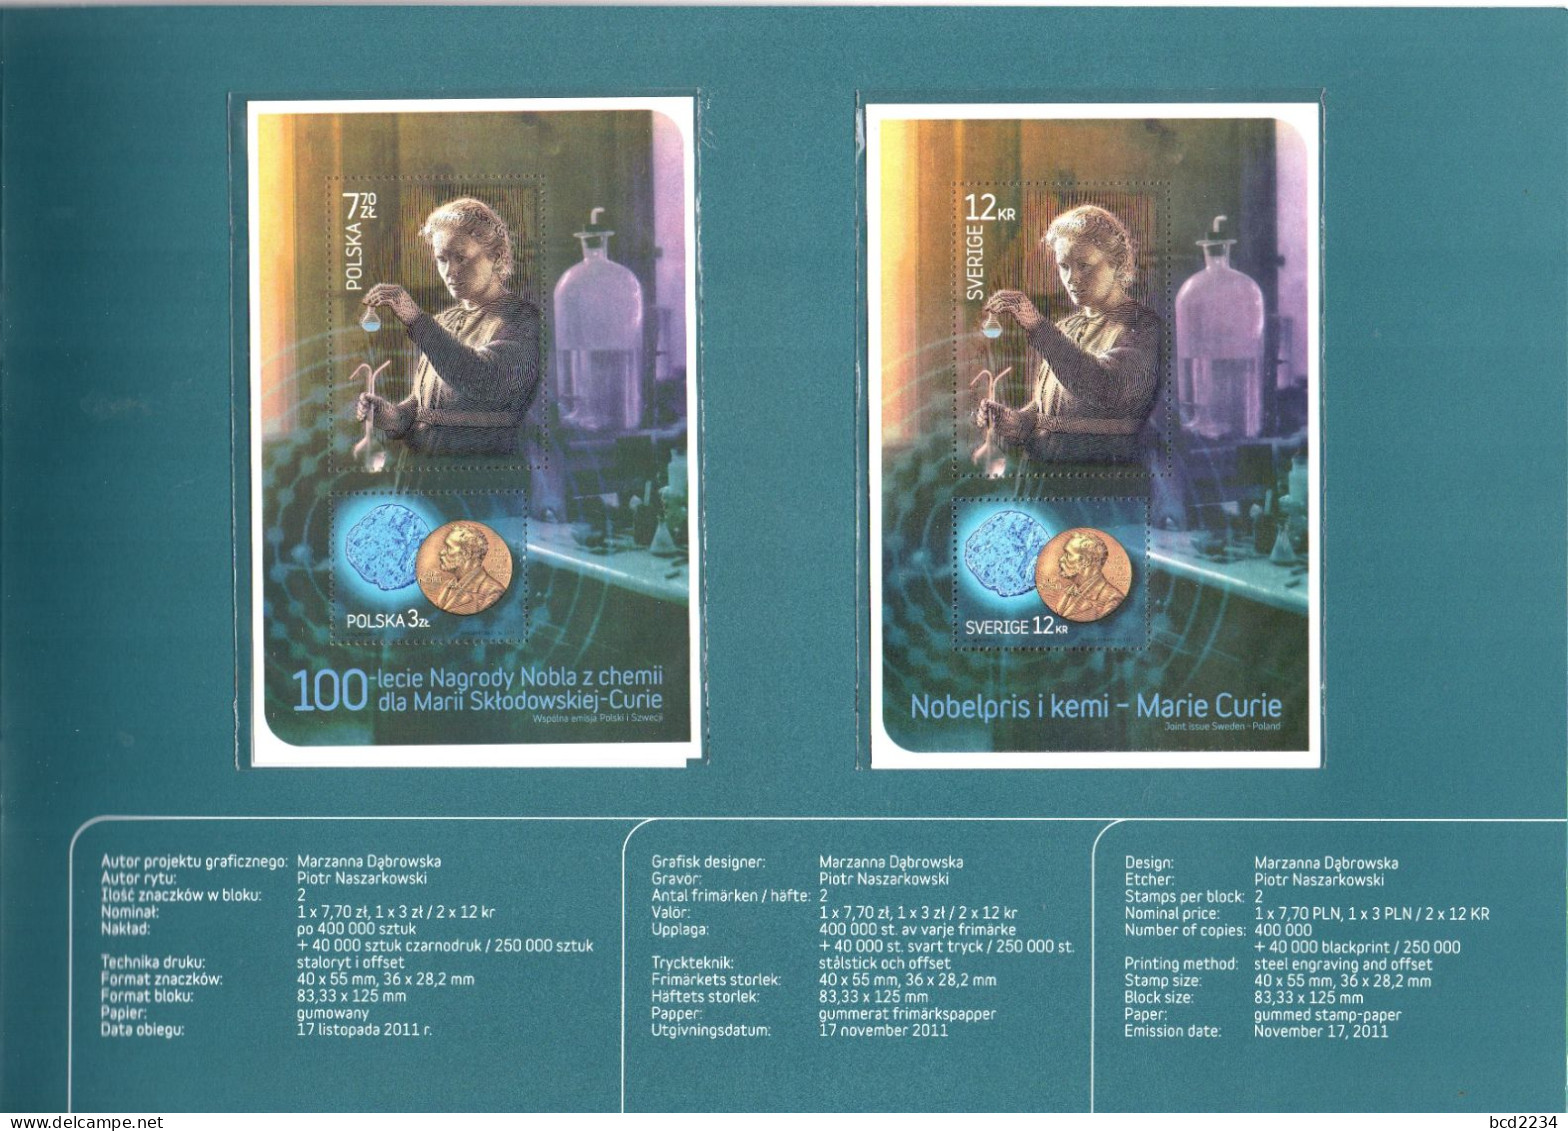 POLAND 2011 LIMITED EDITION: RARE 100TH ANNIVERSARY MARIE CURIE NOBEL PRIZE CHEMISTRY FOLDER FDC MS PL SWEDEN - FDC